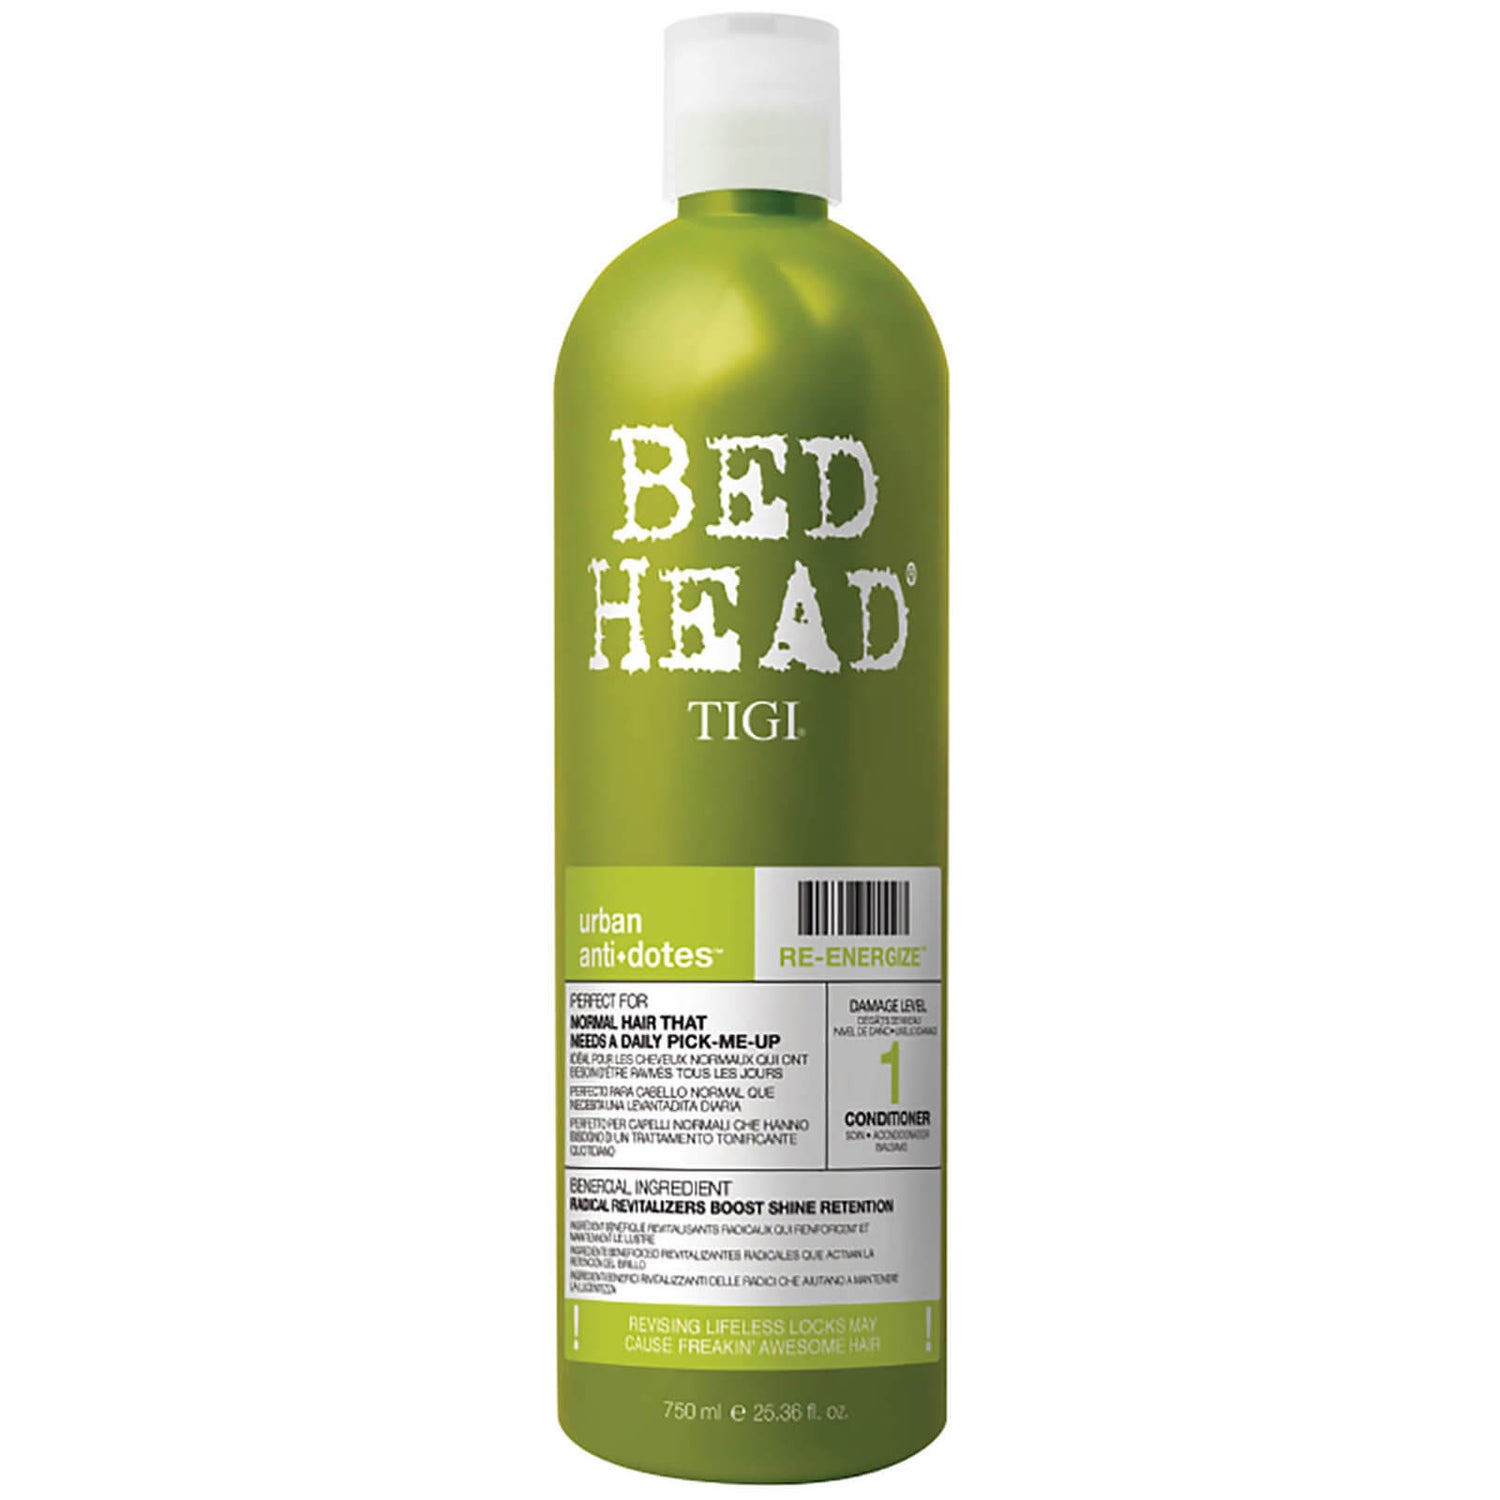 TIGI Bed Head Urban Antidotes Re-energize Daily Conditioner for Normal Hair 750ml (Worth $72)